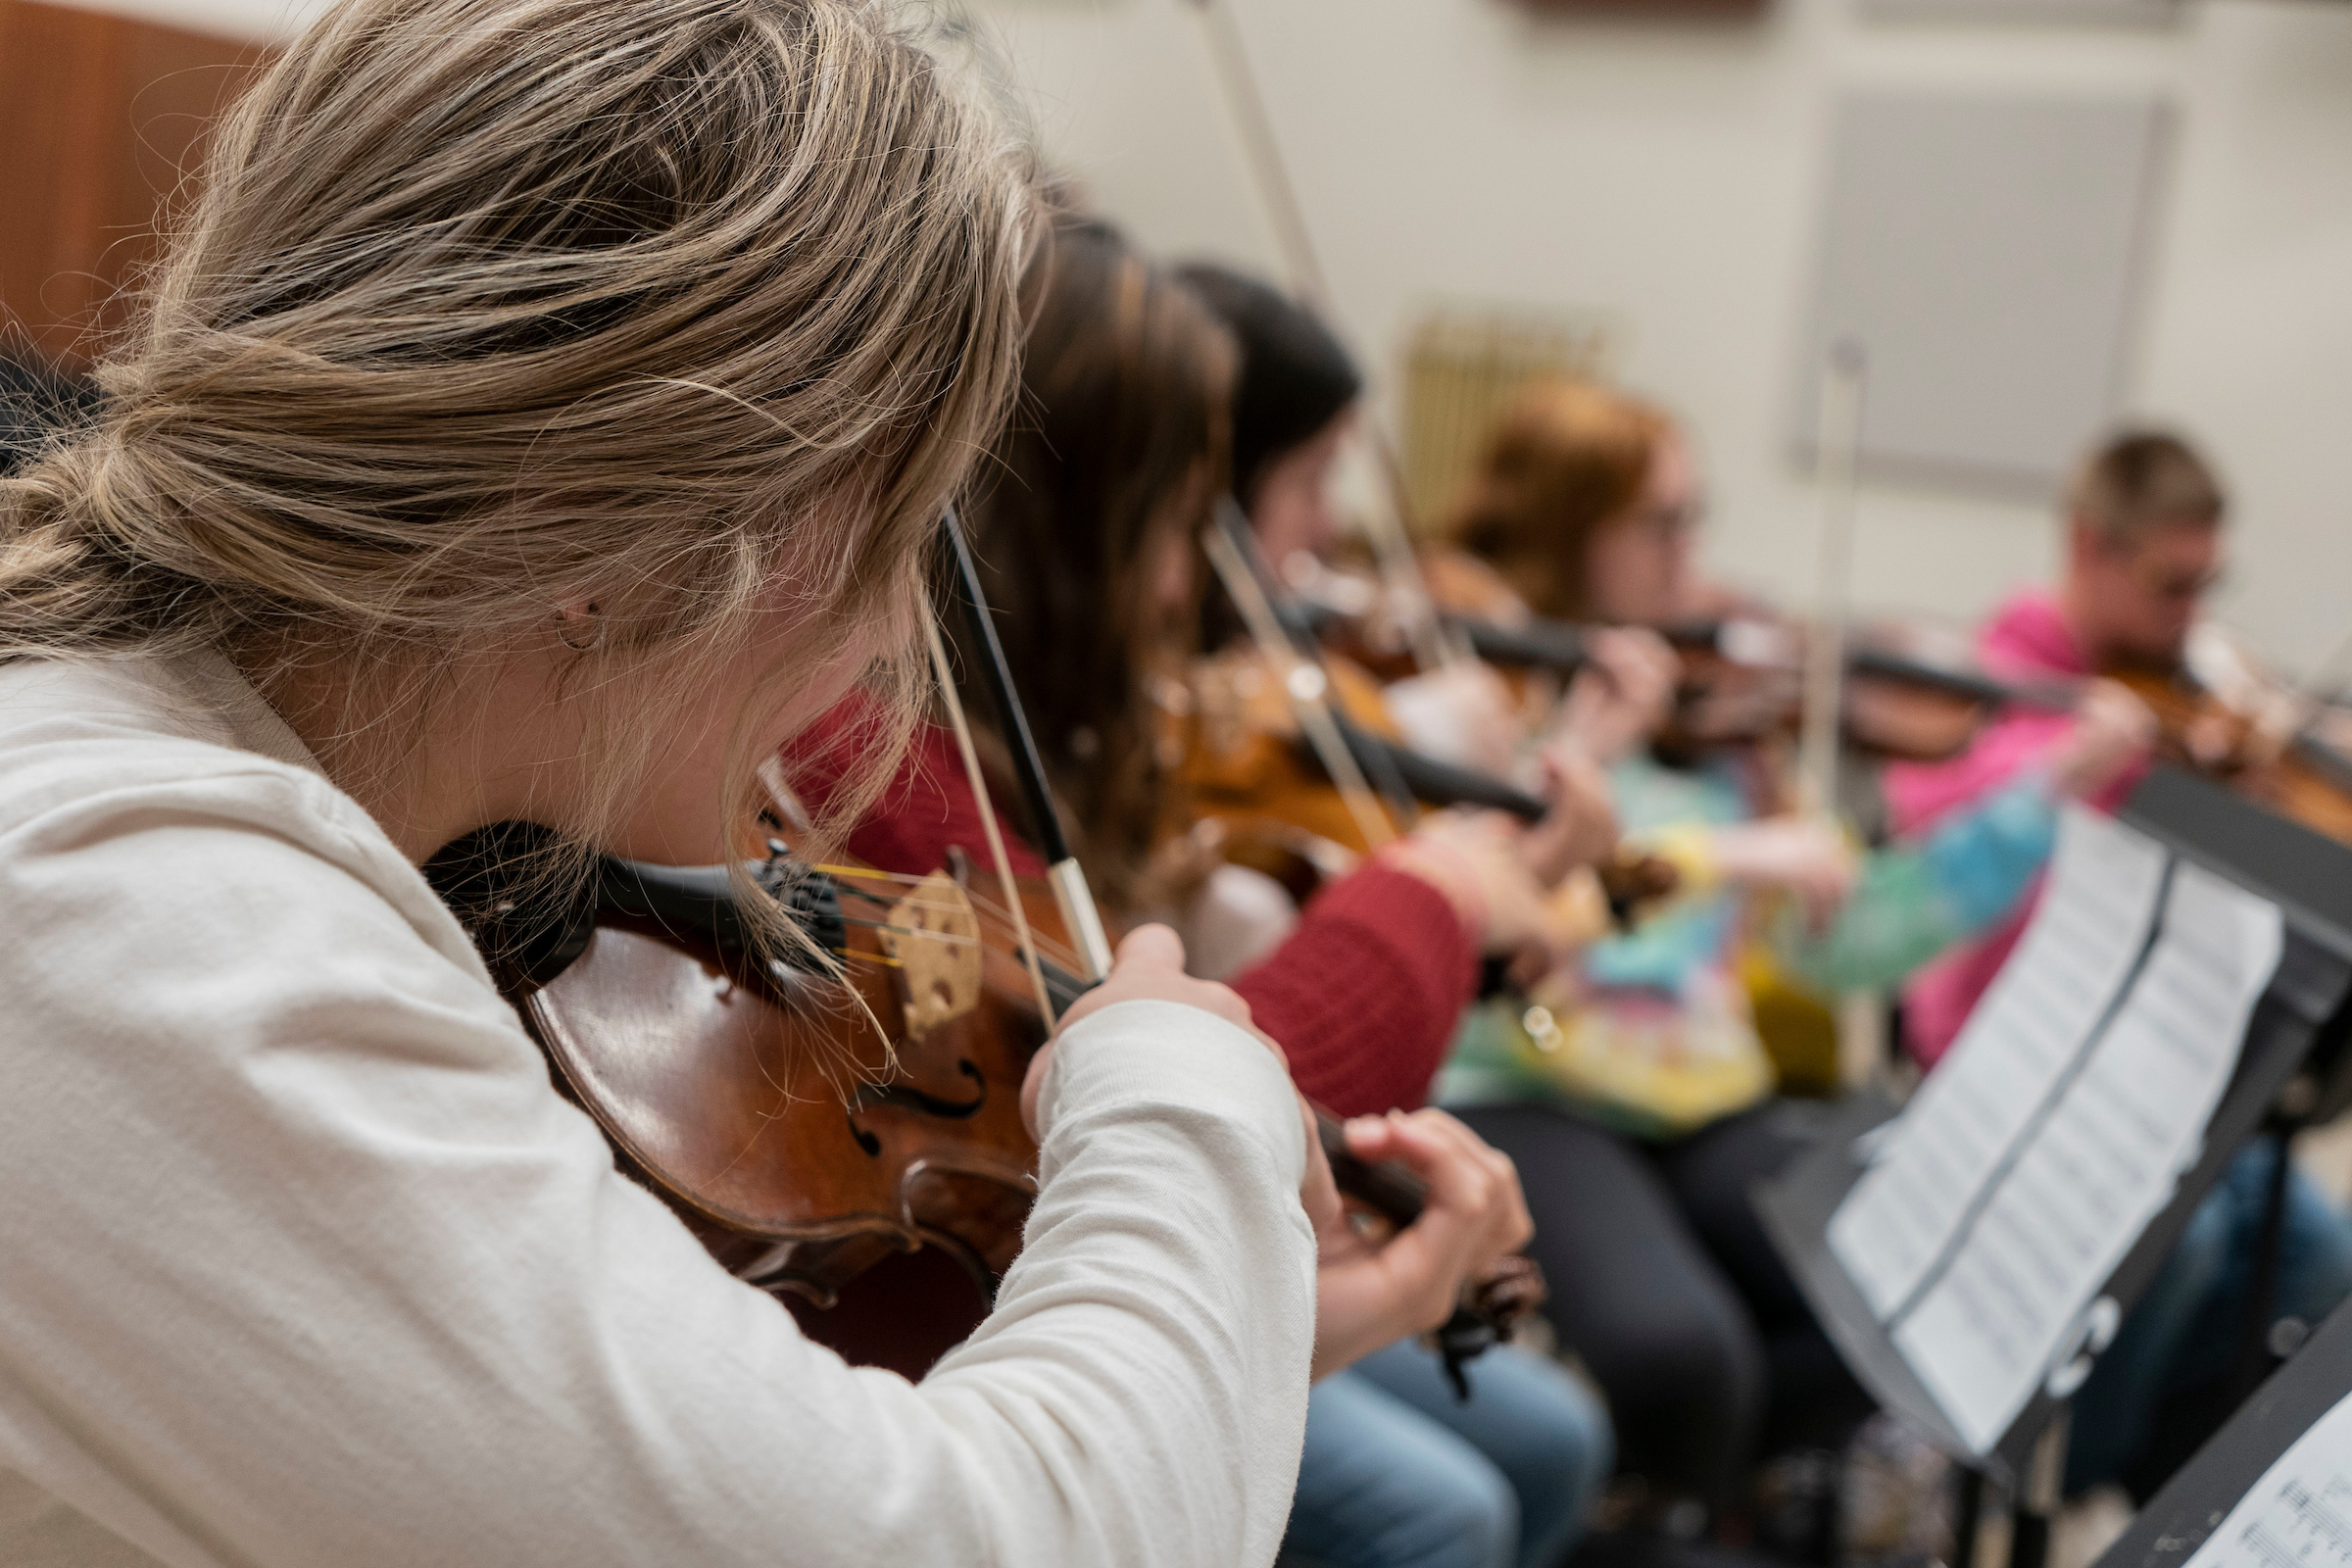 Orchestra students play string instruments in studio